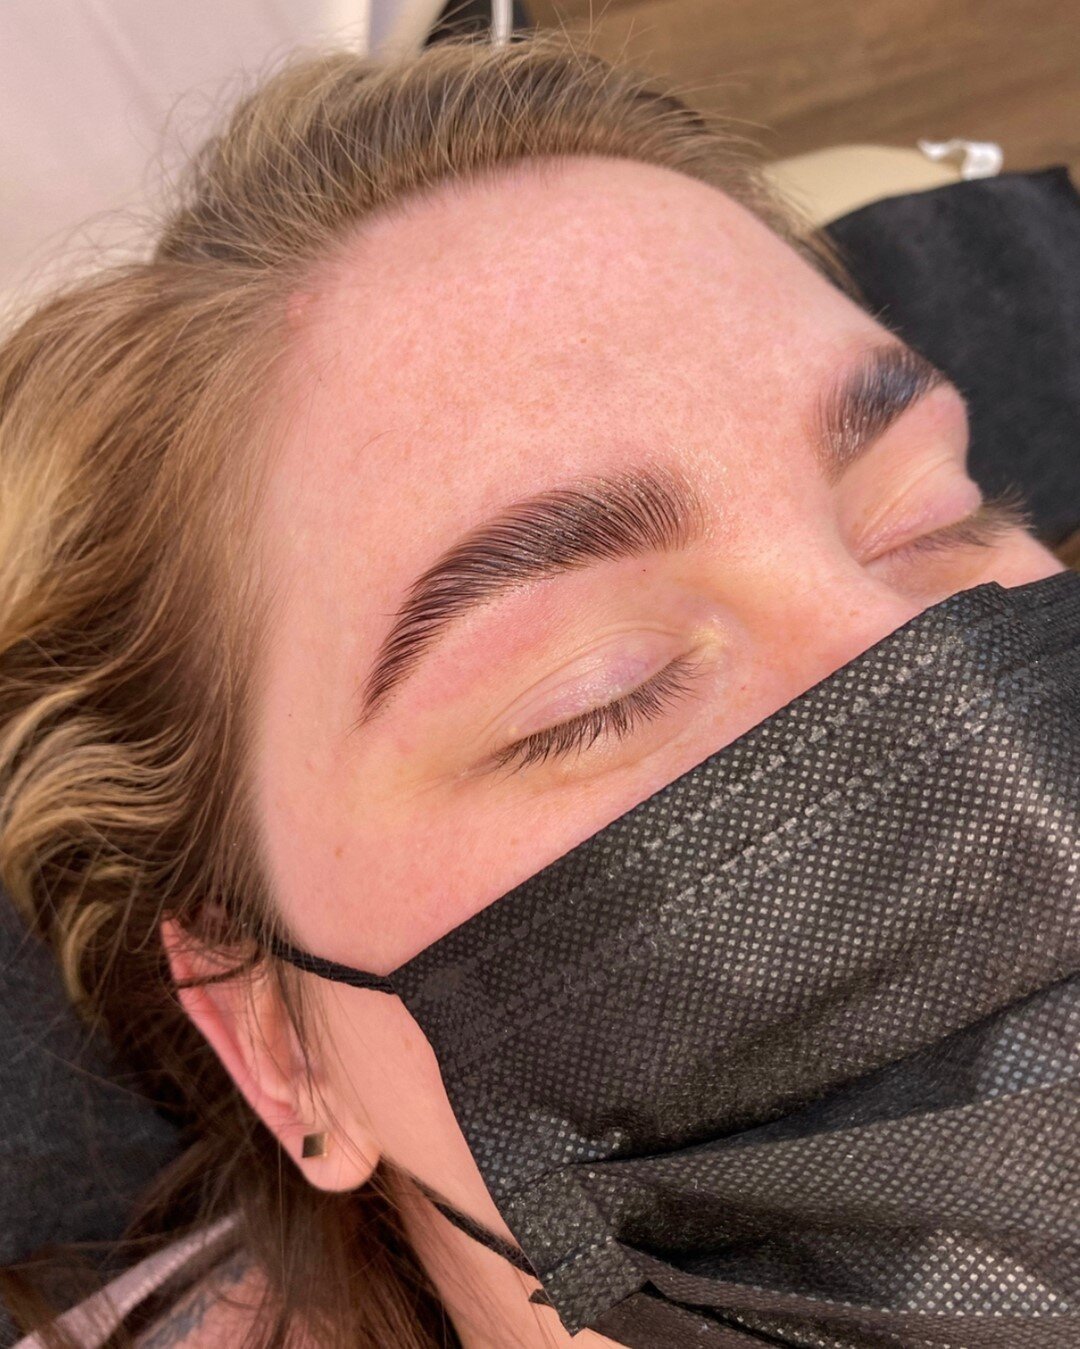 Beautiful brow lamination by @jackiescullybeauty 🤍⠀⠀⠀⠀⠀⠀⠀⠀⠀
Learn how to go beyond the basics of brow shaping, and learn the true art behind brow design to get the perfect shape for each client with Jackie&rsquo;s workshop on August 29th! ⠀⠀⠀⠀⠀⠀⠀⠀⠀
